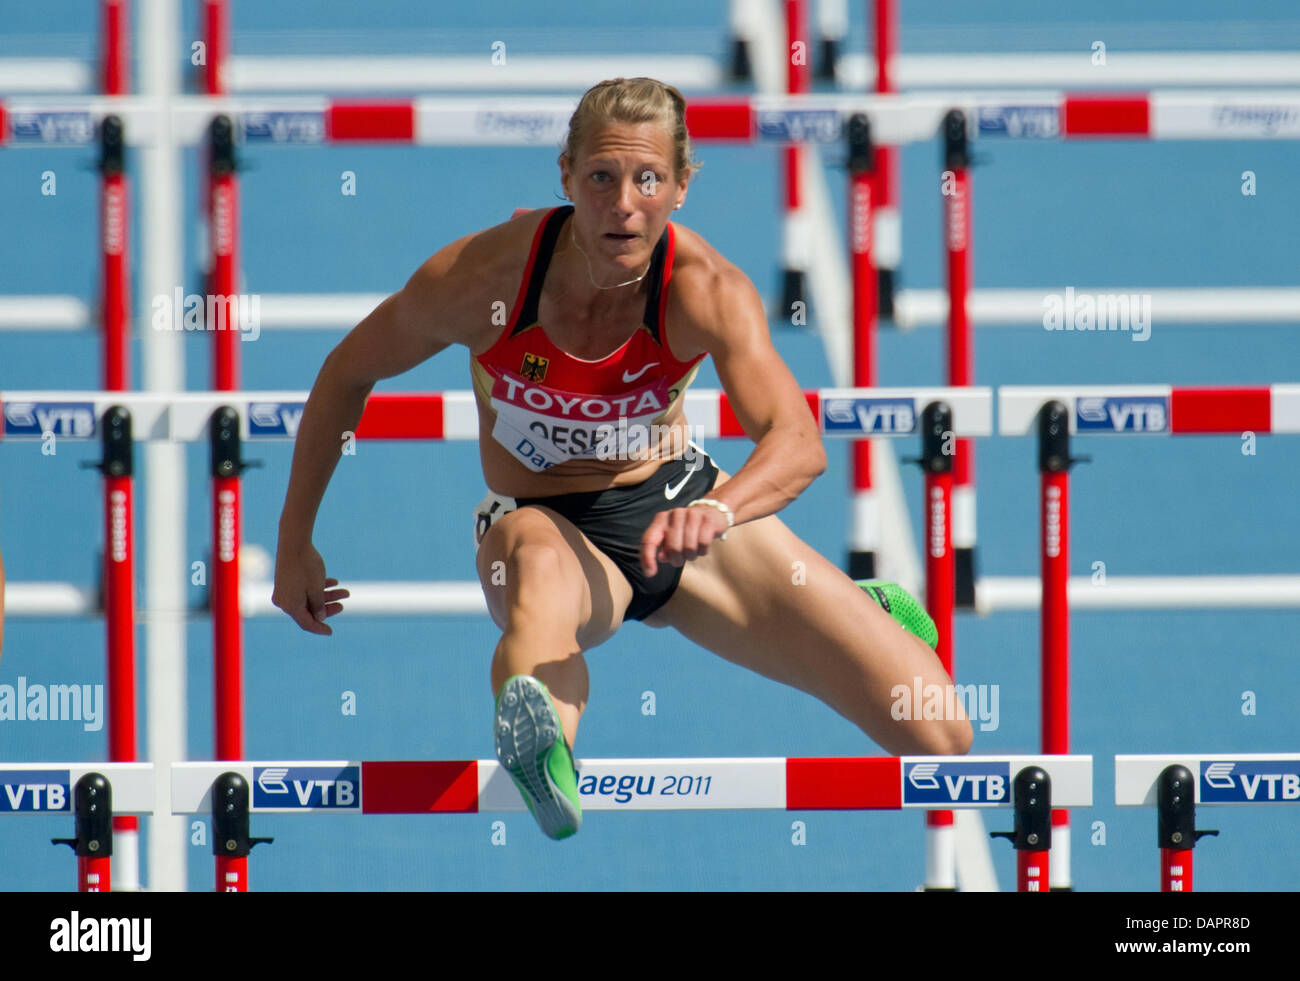 Jennifer Oeser of Germany competes in the womens 100 m Hurdels event of the Heptathlon competition at the 13th IAAF World Championships in Athletics, in Daegu, Republic of Korea, 29 August 2011. Photo: Bernd Thissen dpa Stock Photo